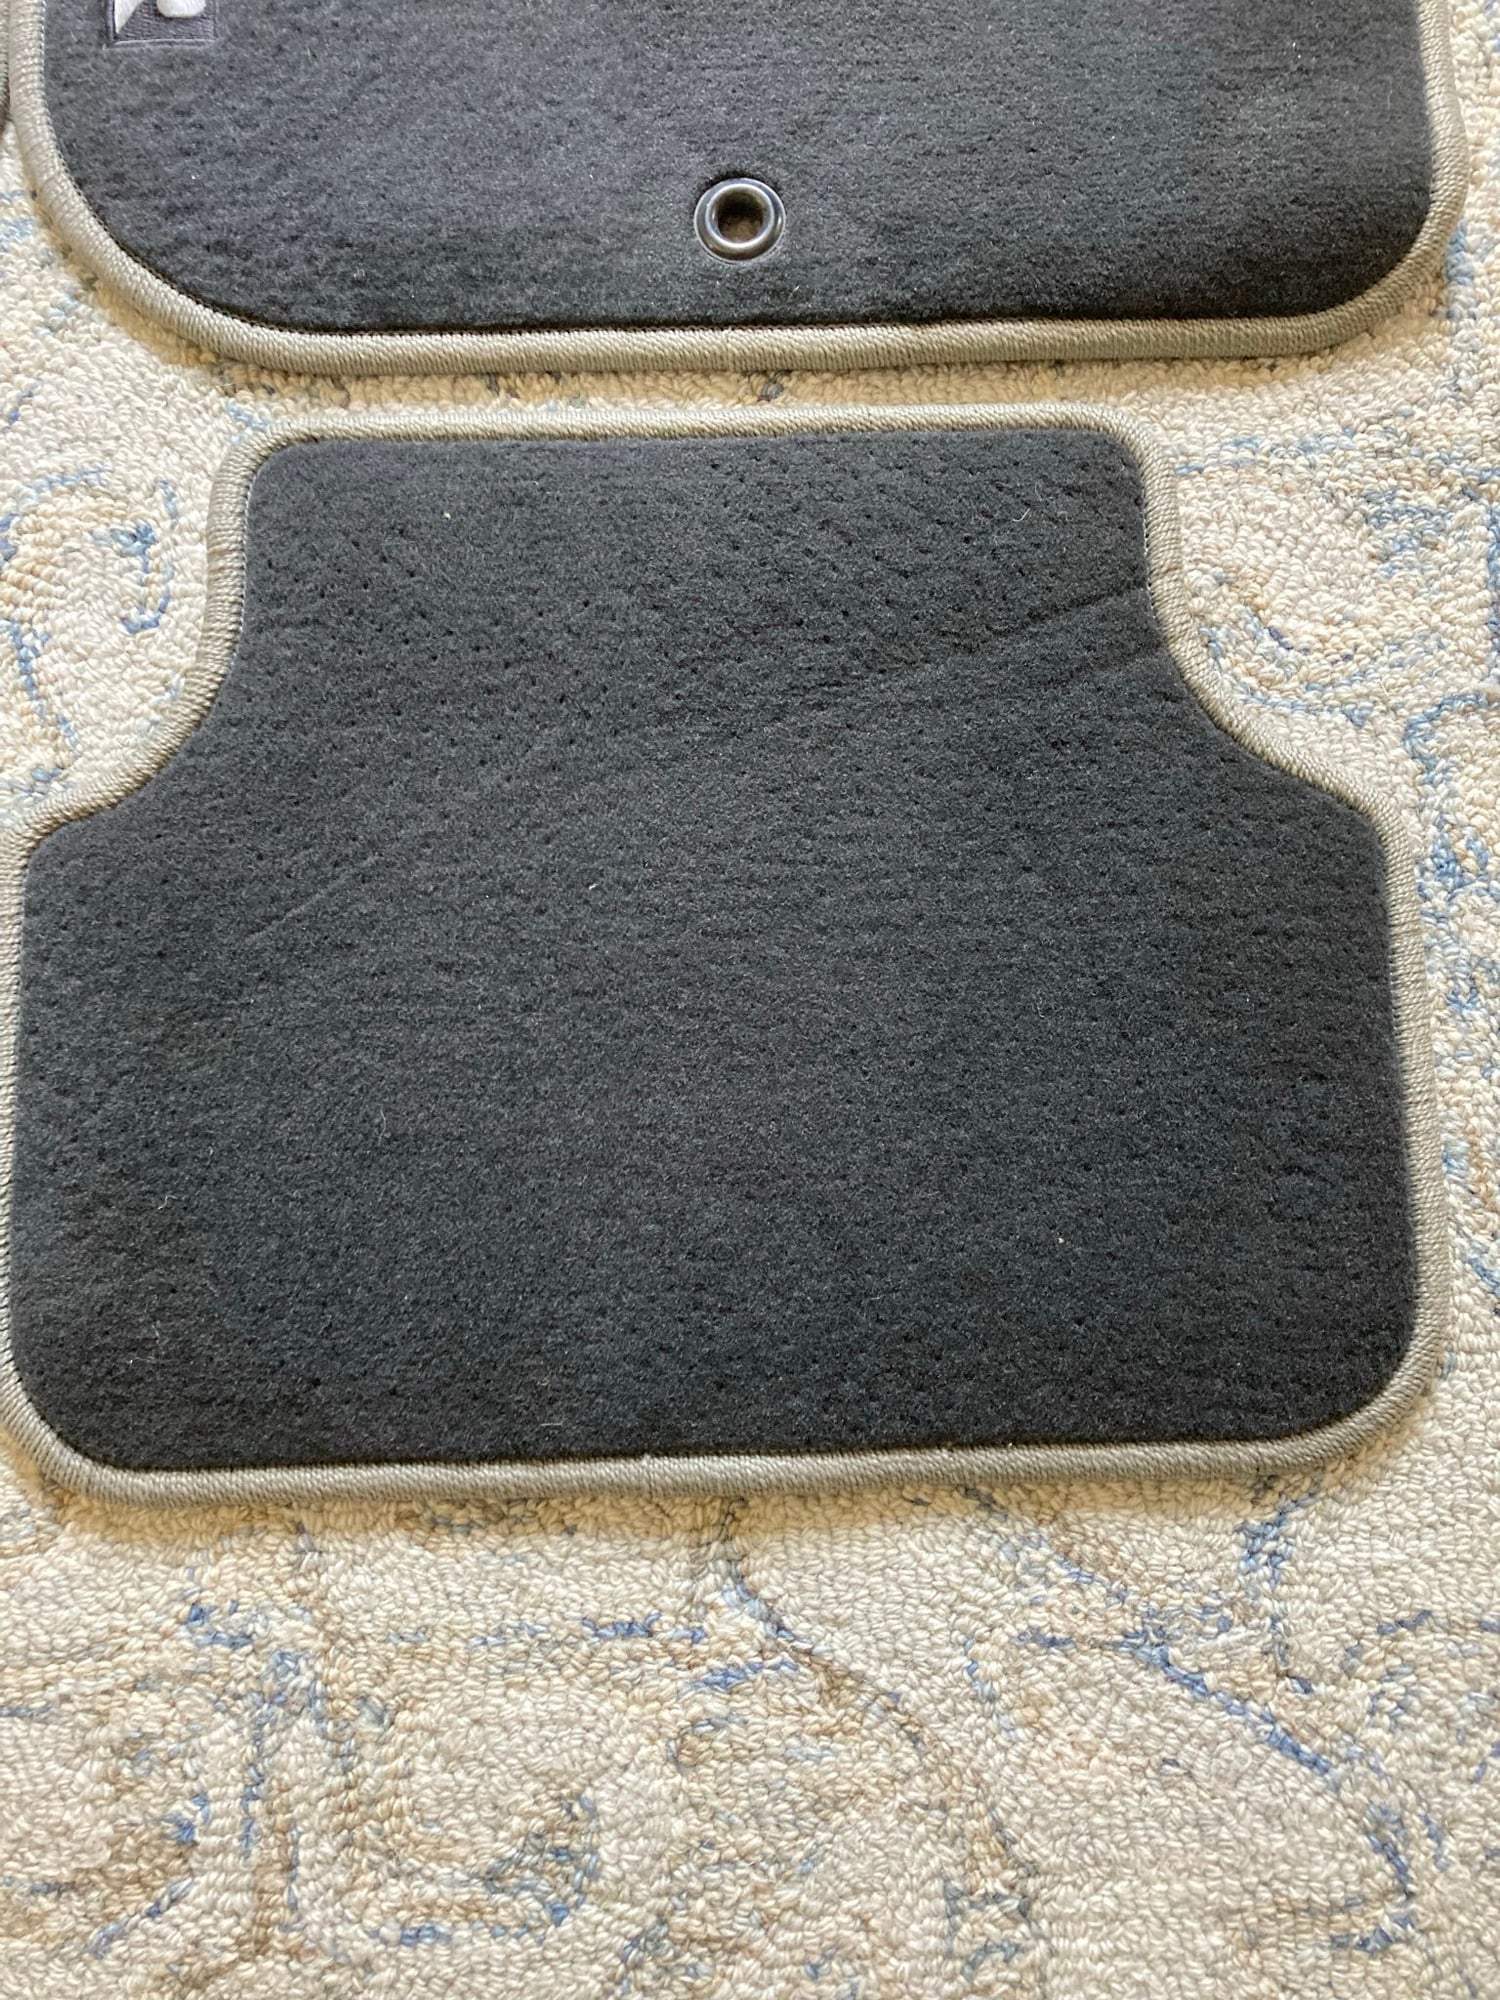 Interior/Upholstery - Set of OEM Unused Floor Mats from my SS. - New - 0  All Models - Londonderry, NH 03053, United States